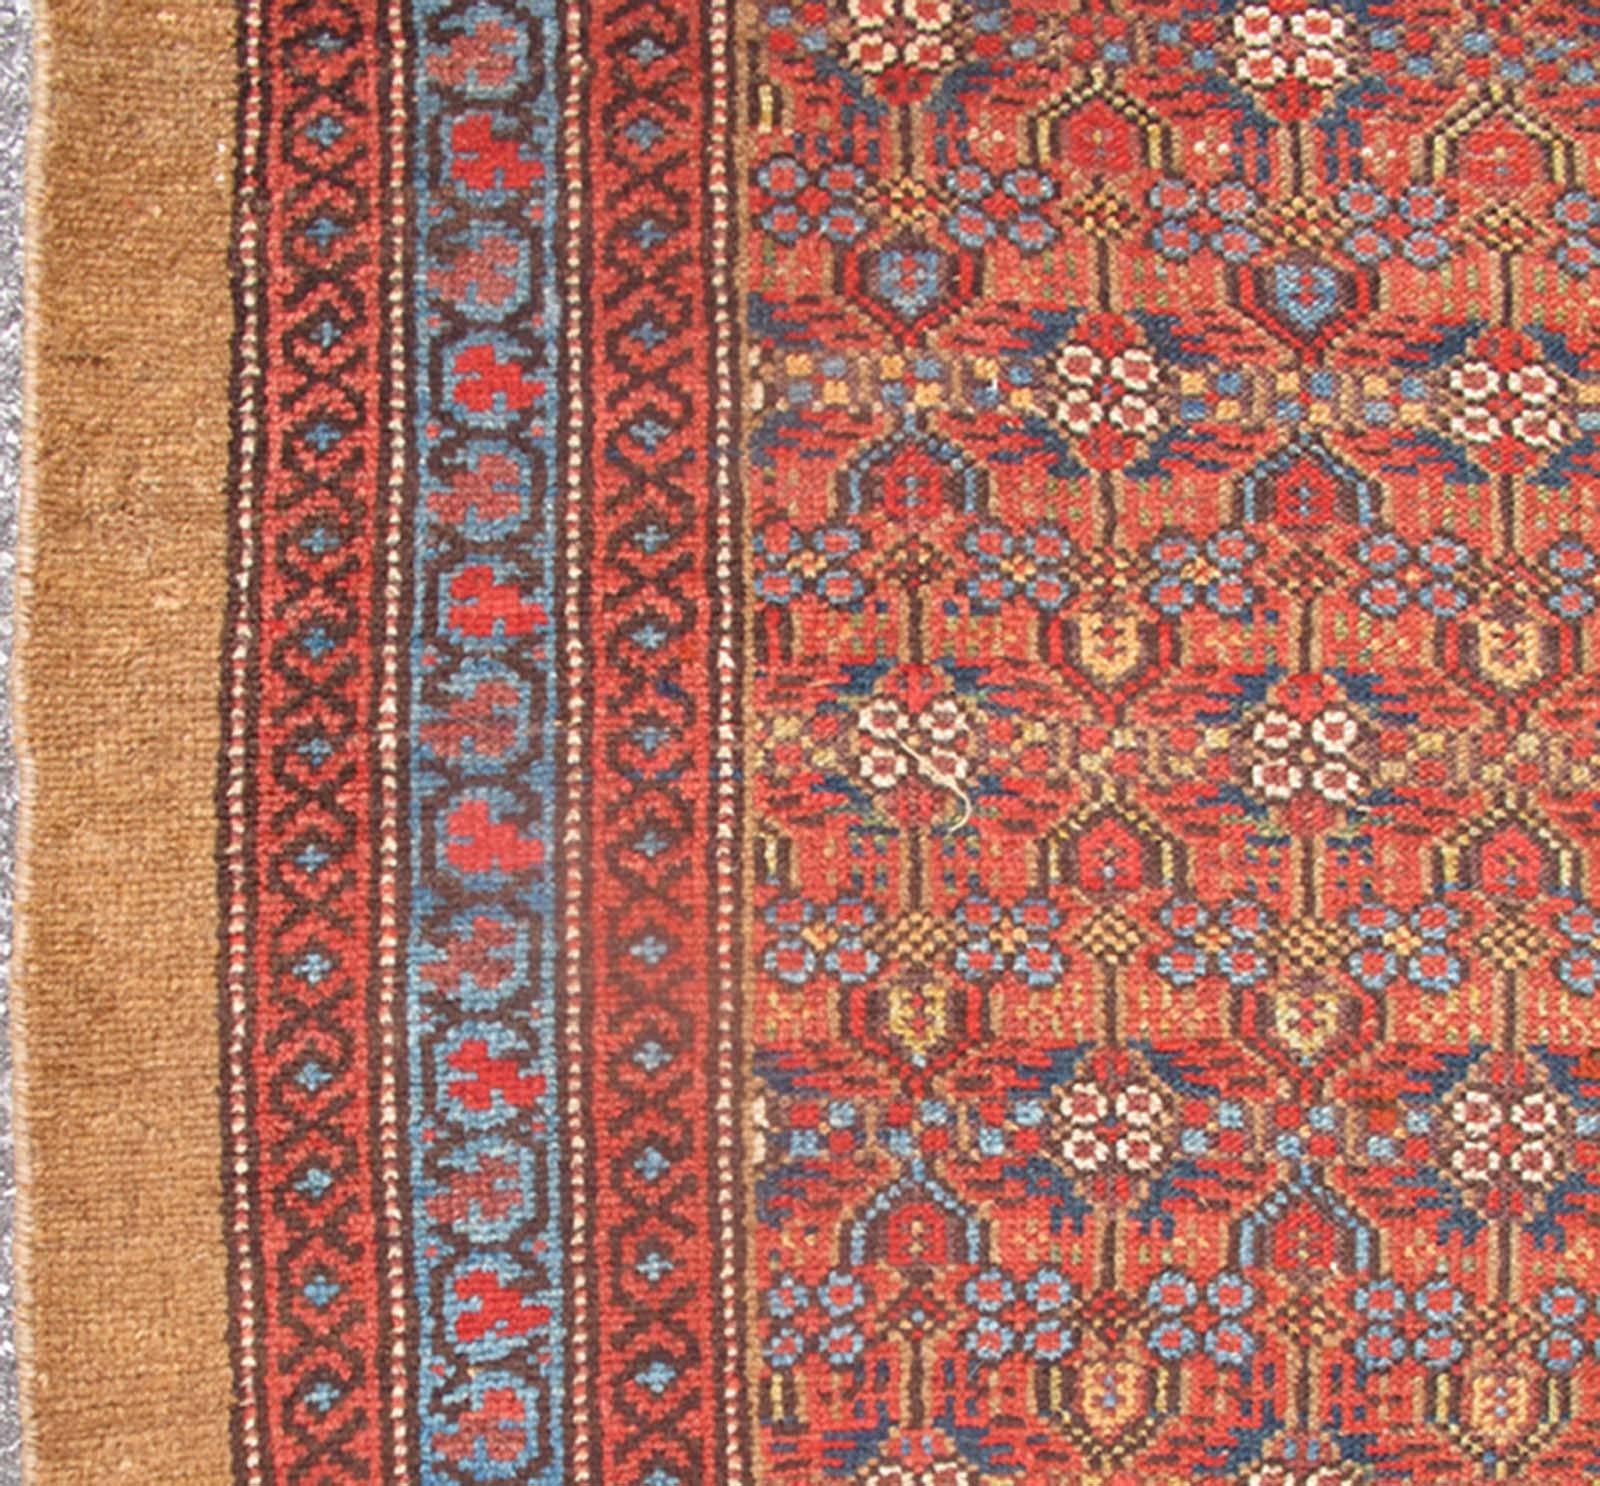 Long runner antique rug from Persia with simple geometric design in camel, tan, red, blue tones, rug 13-0516, country of origin / type: Iran / camel hair, circa 1900.

This handwoven, antique Persian camel hair Serab rug features a small repeating